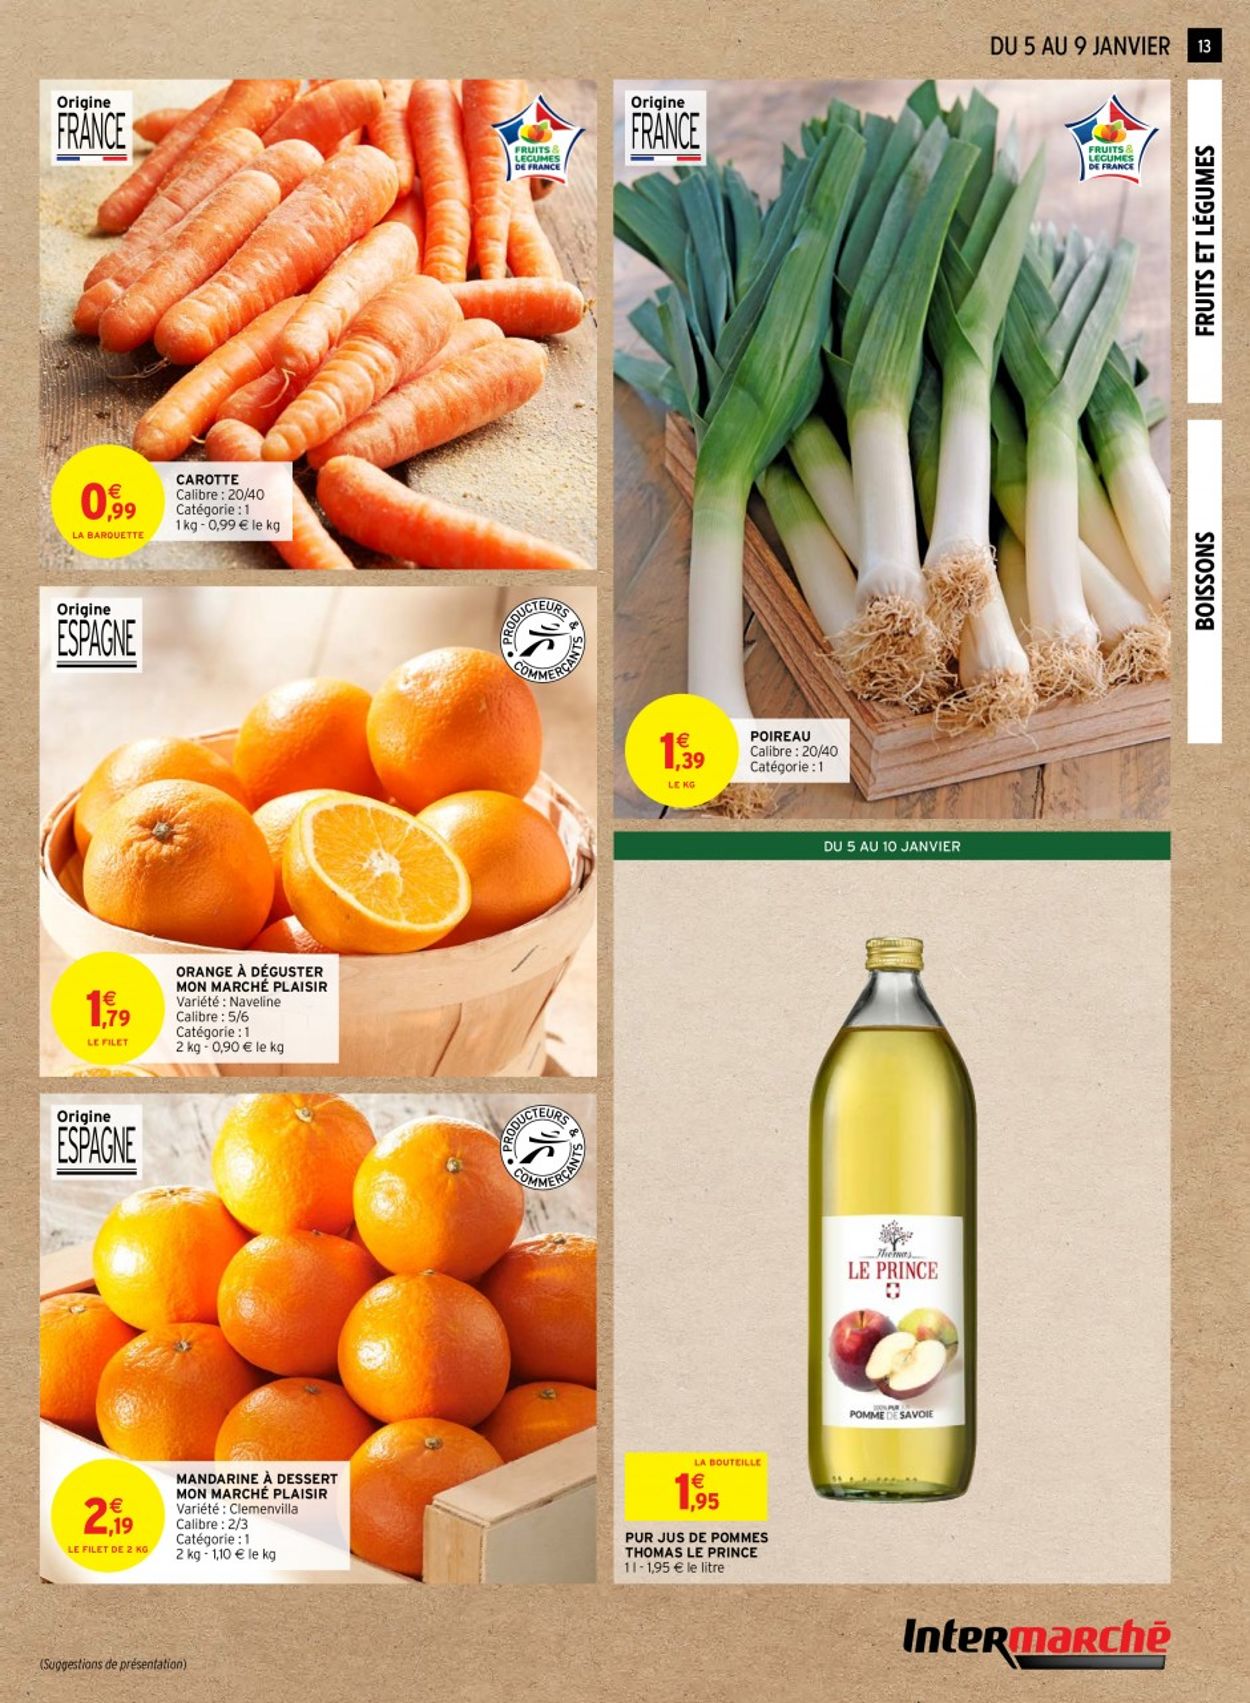 Intermarché Special Choucroute 2021 Catalogue - 05.01-10.01.2021 (Page 13)